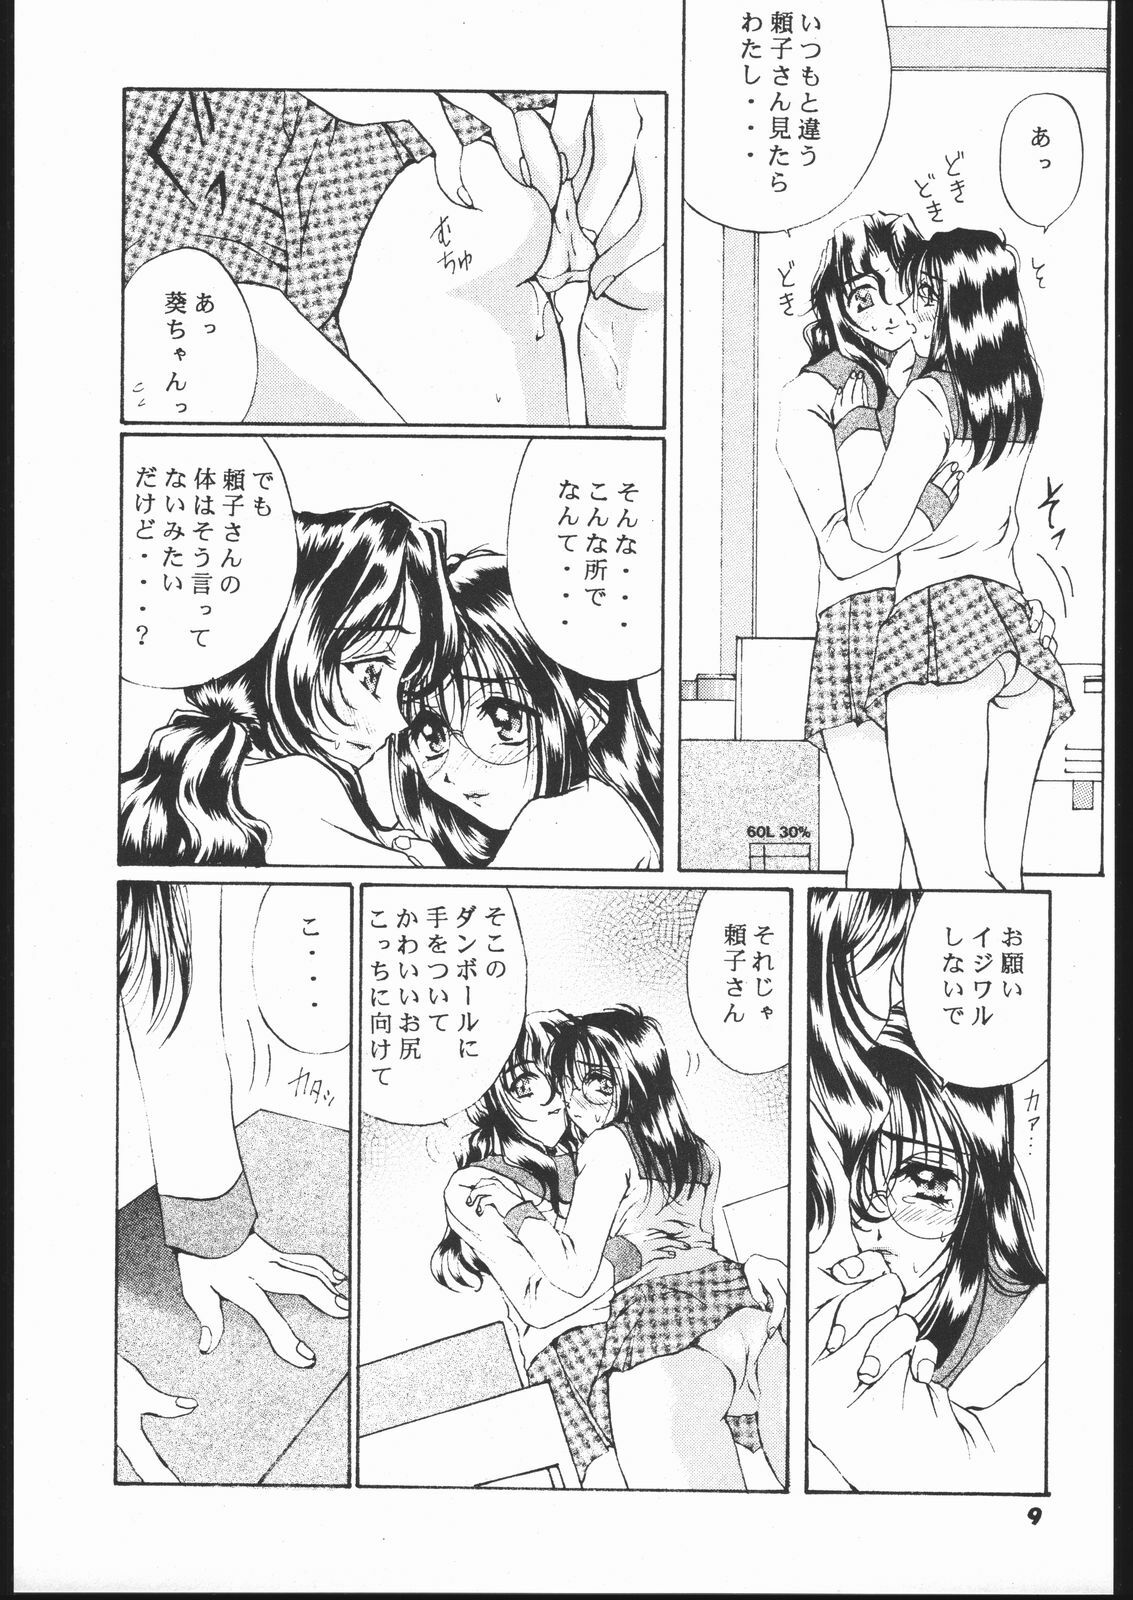 (C57) [Mechanical Code (Takahashi Kobato)] Method to the madness (You're Under Arrest!) page 6 full